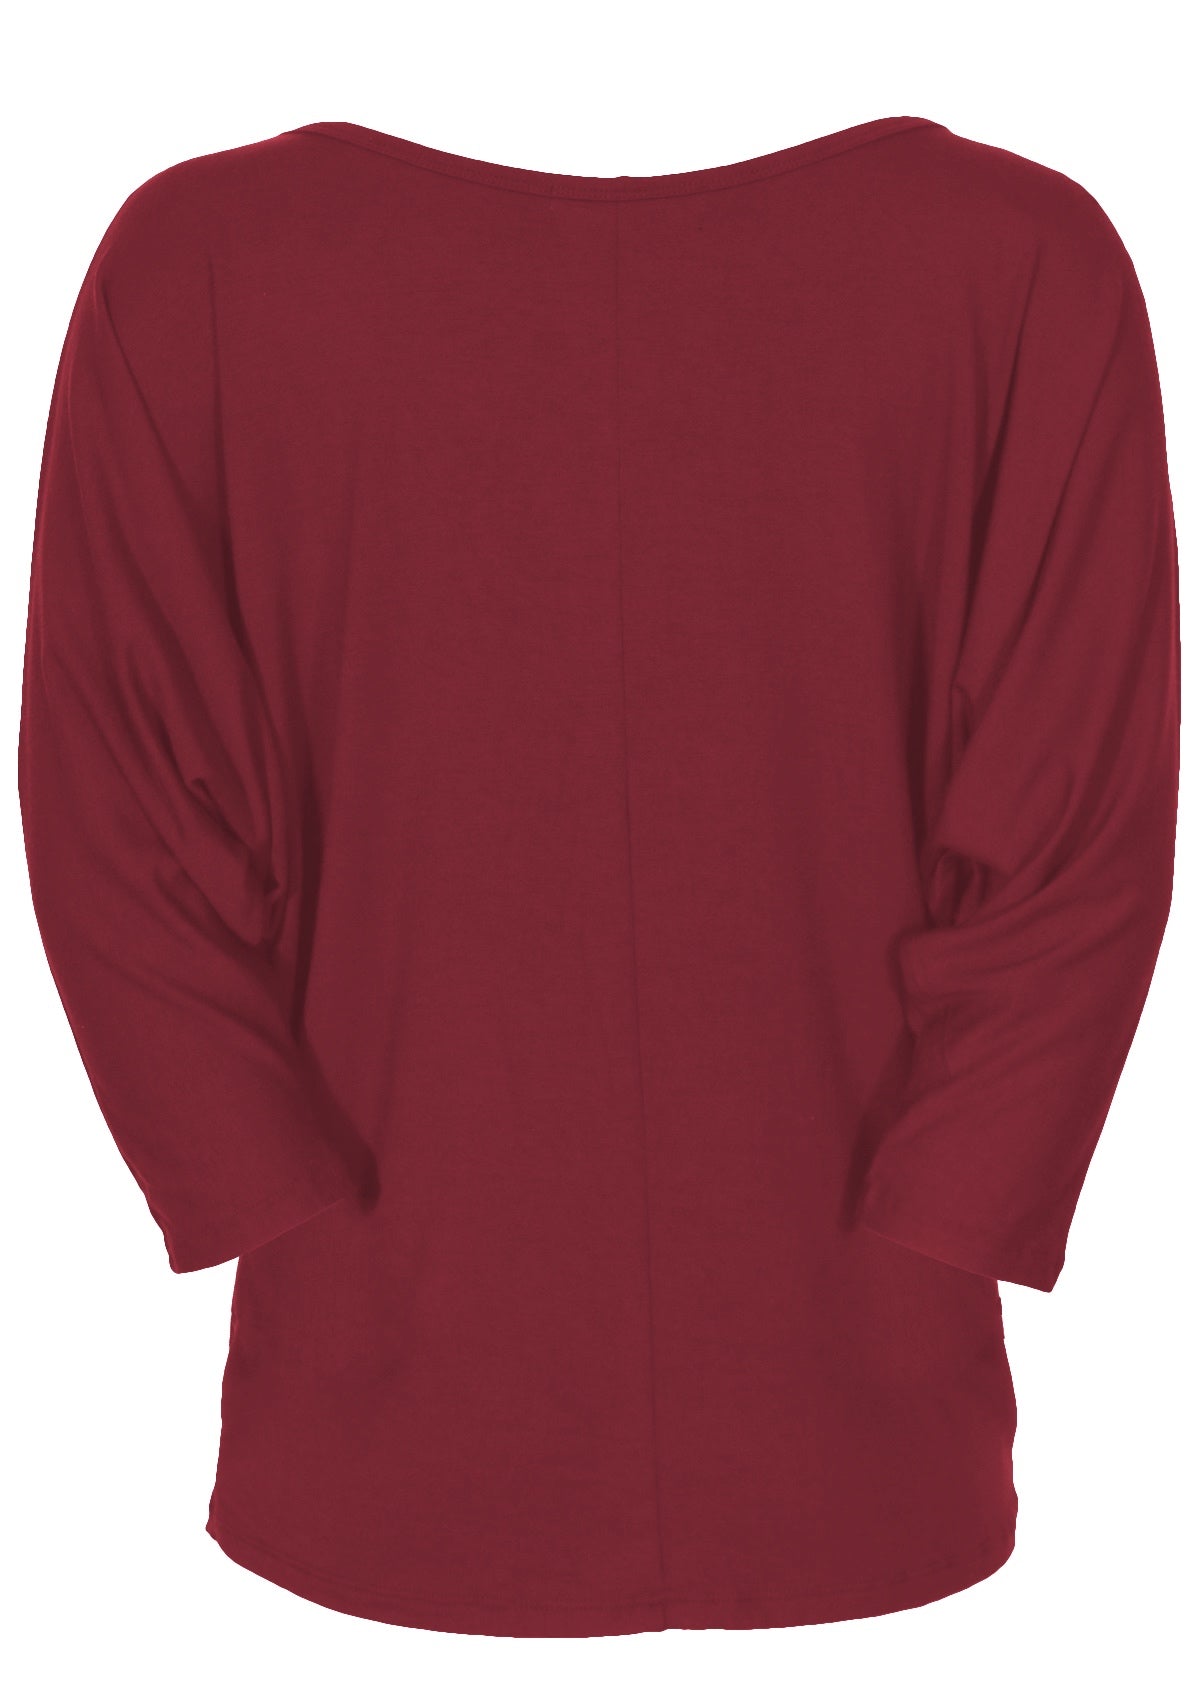 Back view of women's 3/4 sleeve rayon batwing round neckline maroon top.